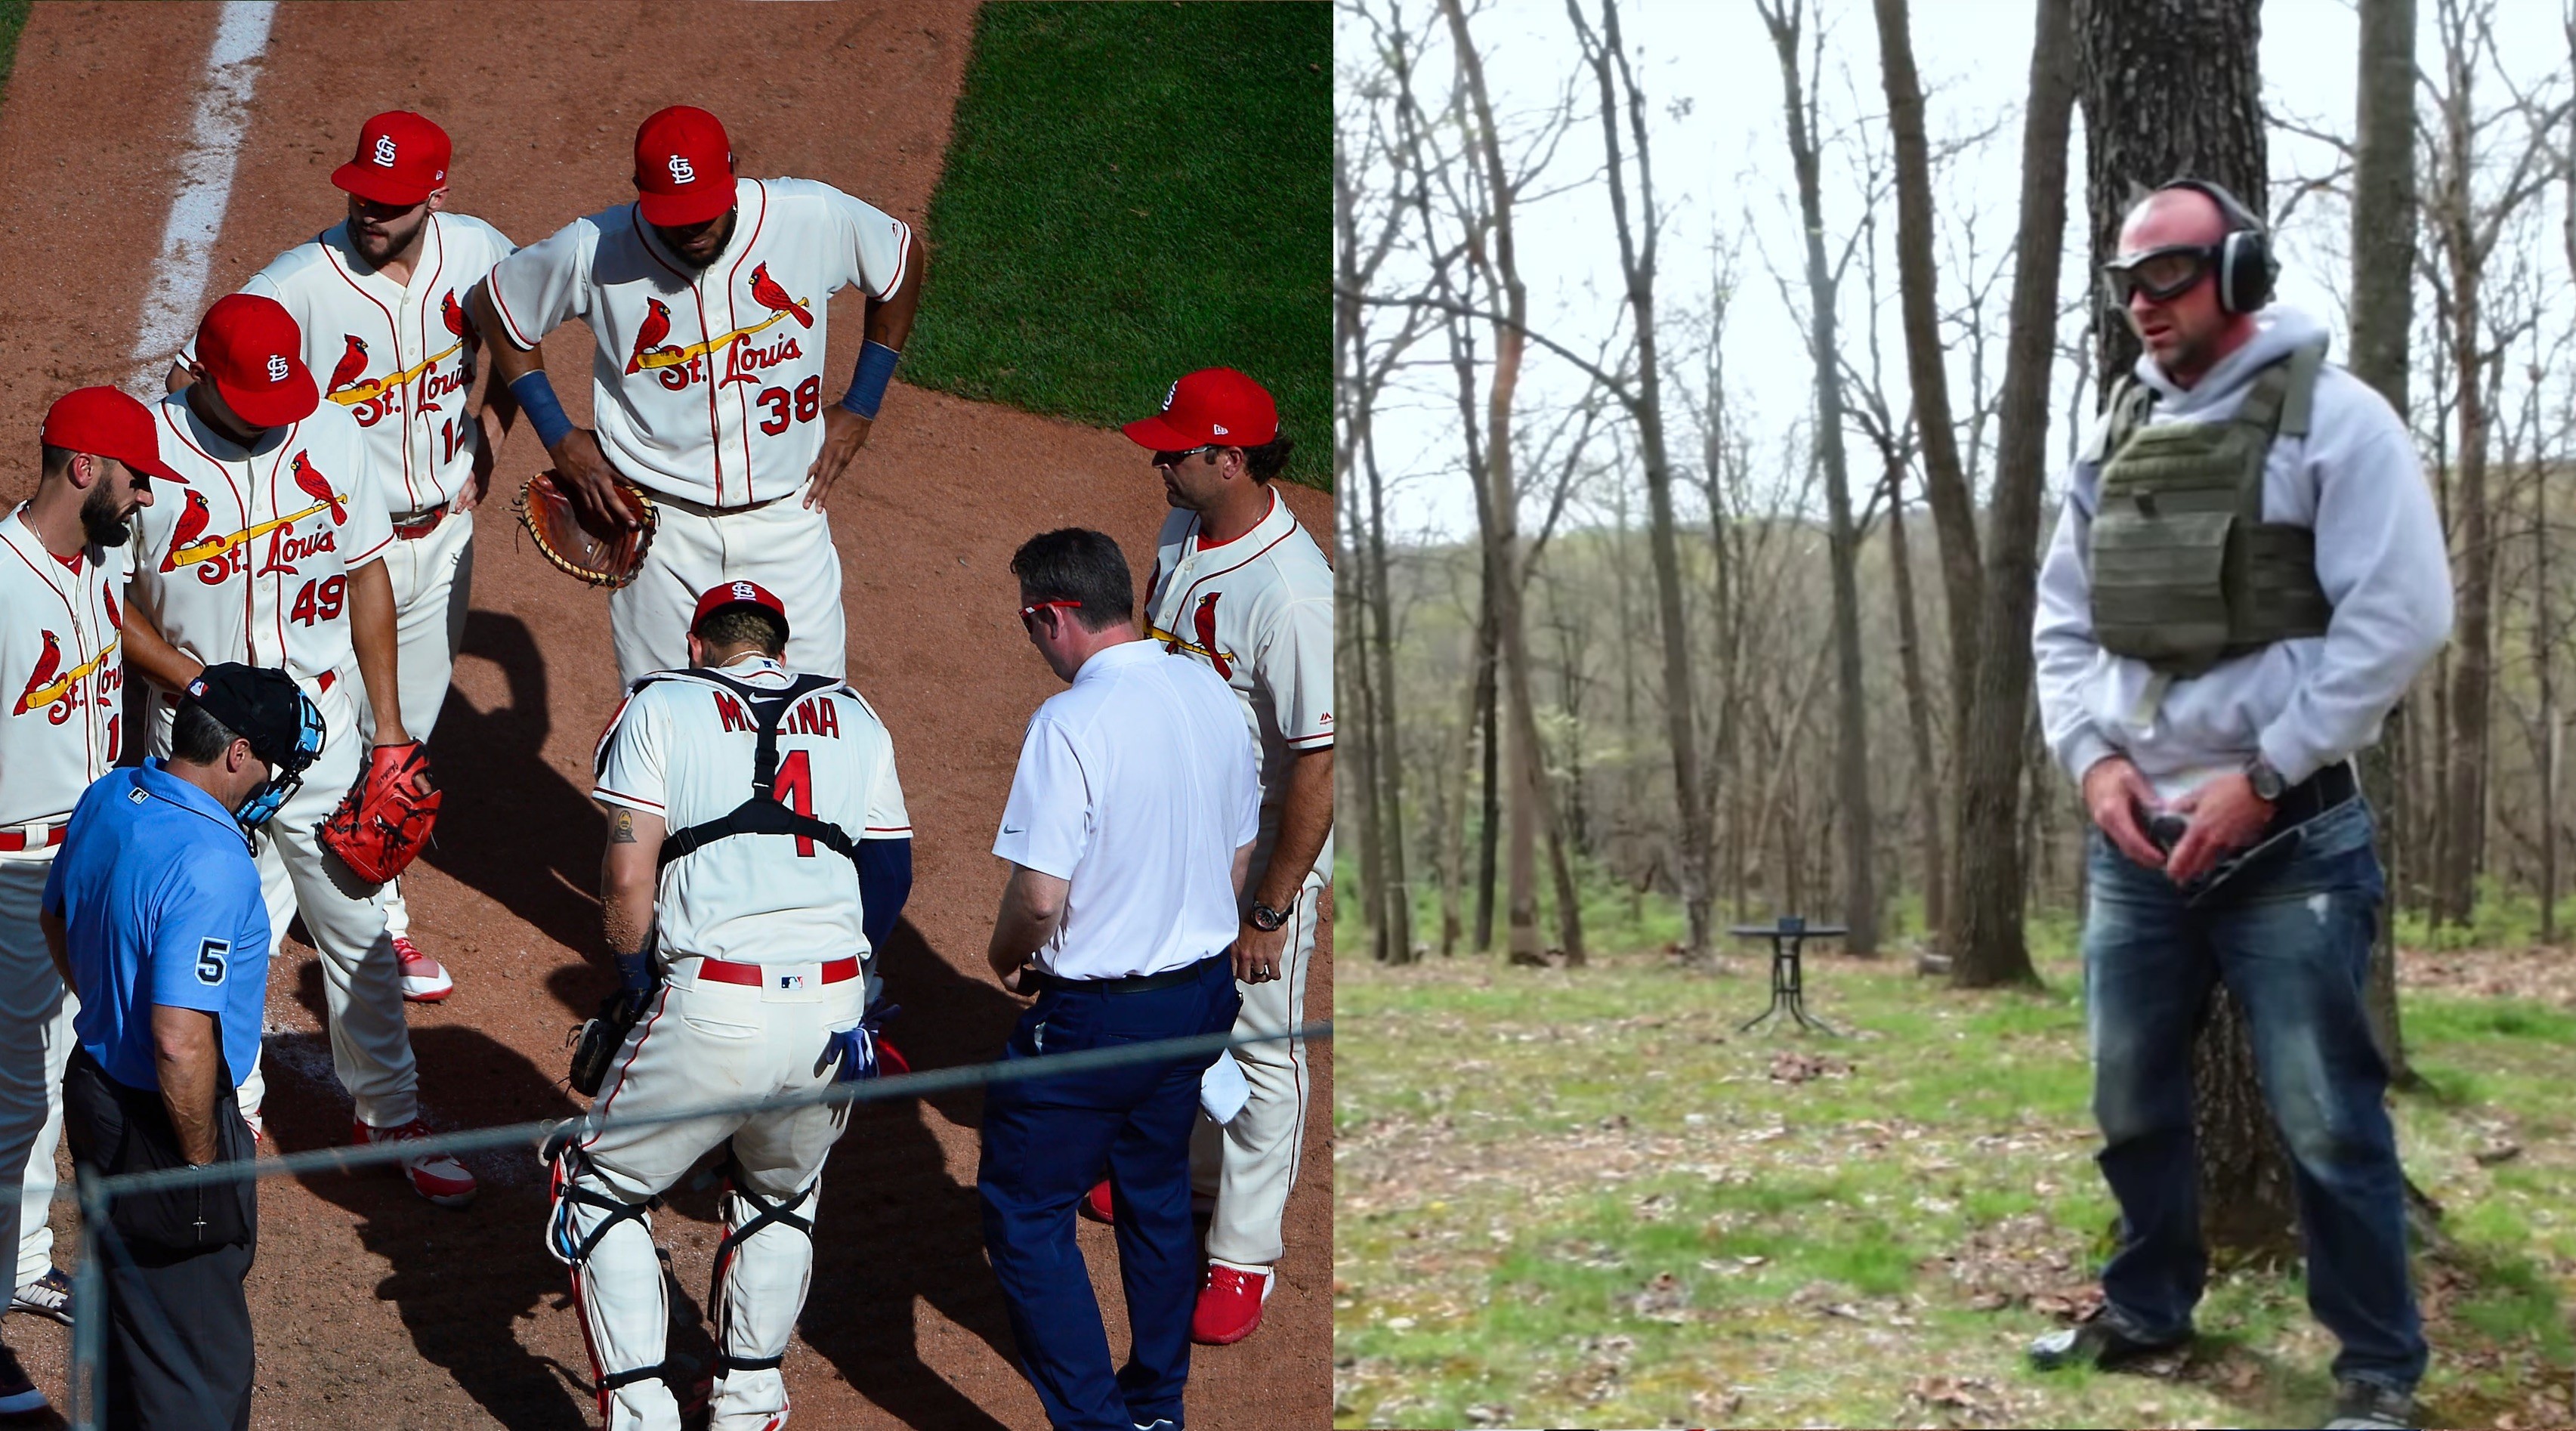 Cardinals stock up on bulletproof cups to protect their catchers after